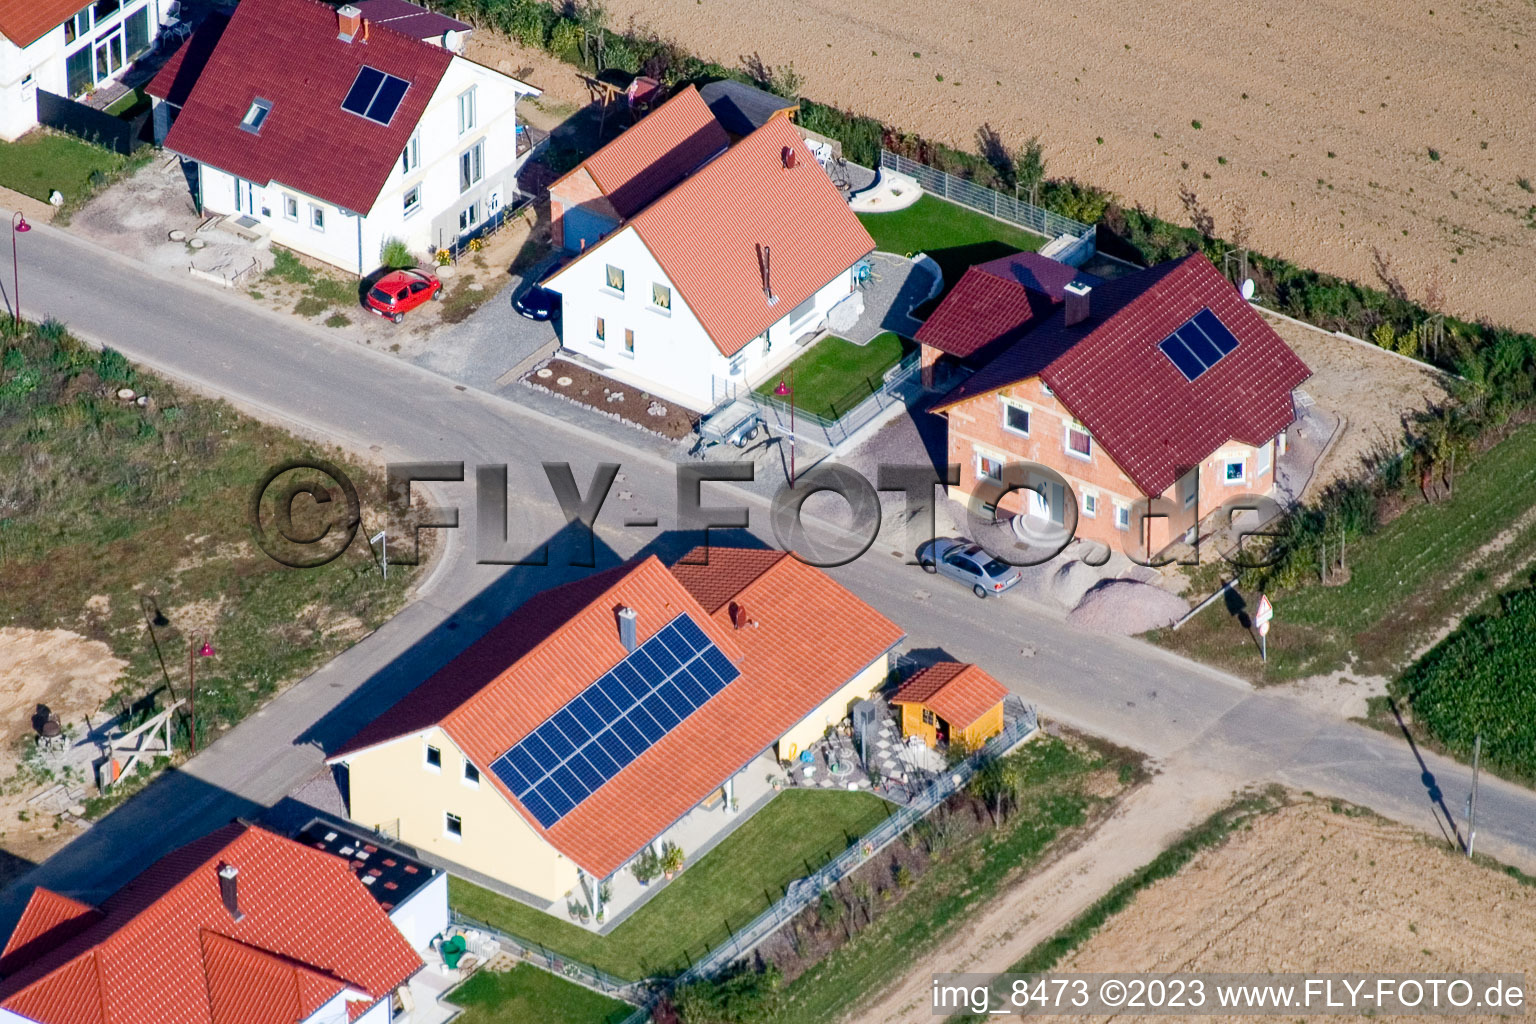 New development area in the Brotäckers in Steinweiler in the state Rhineland-Palatinate, Germany from above